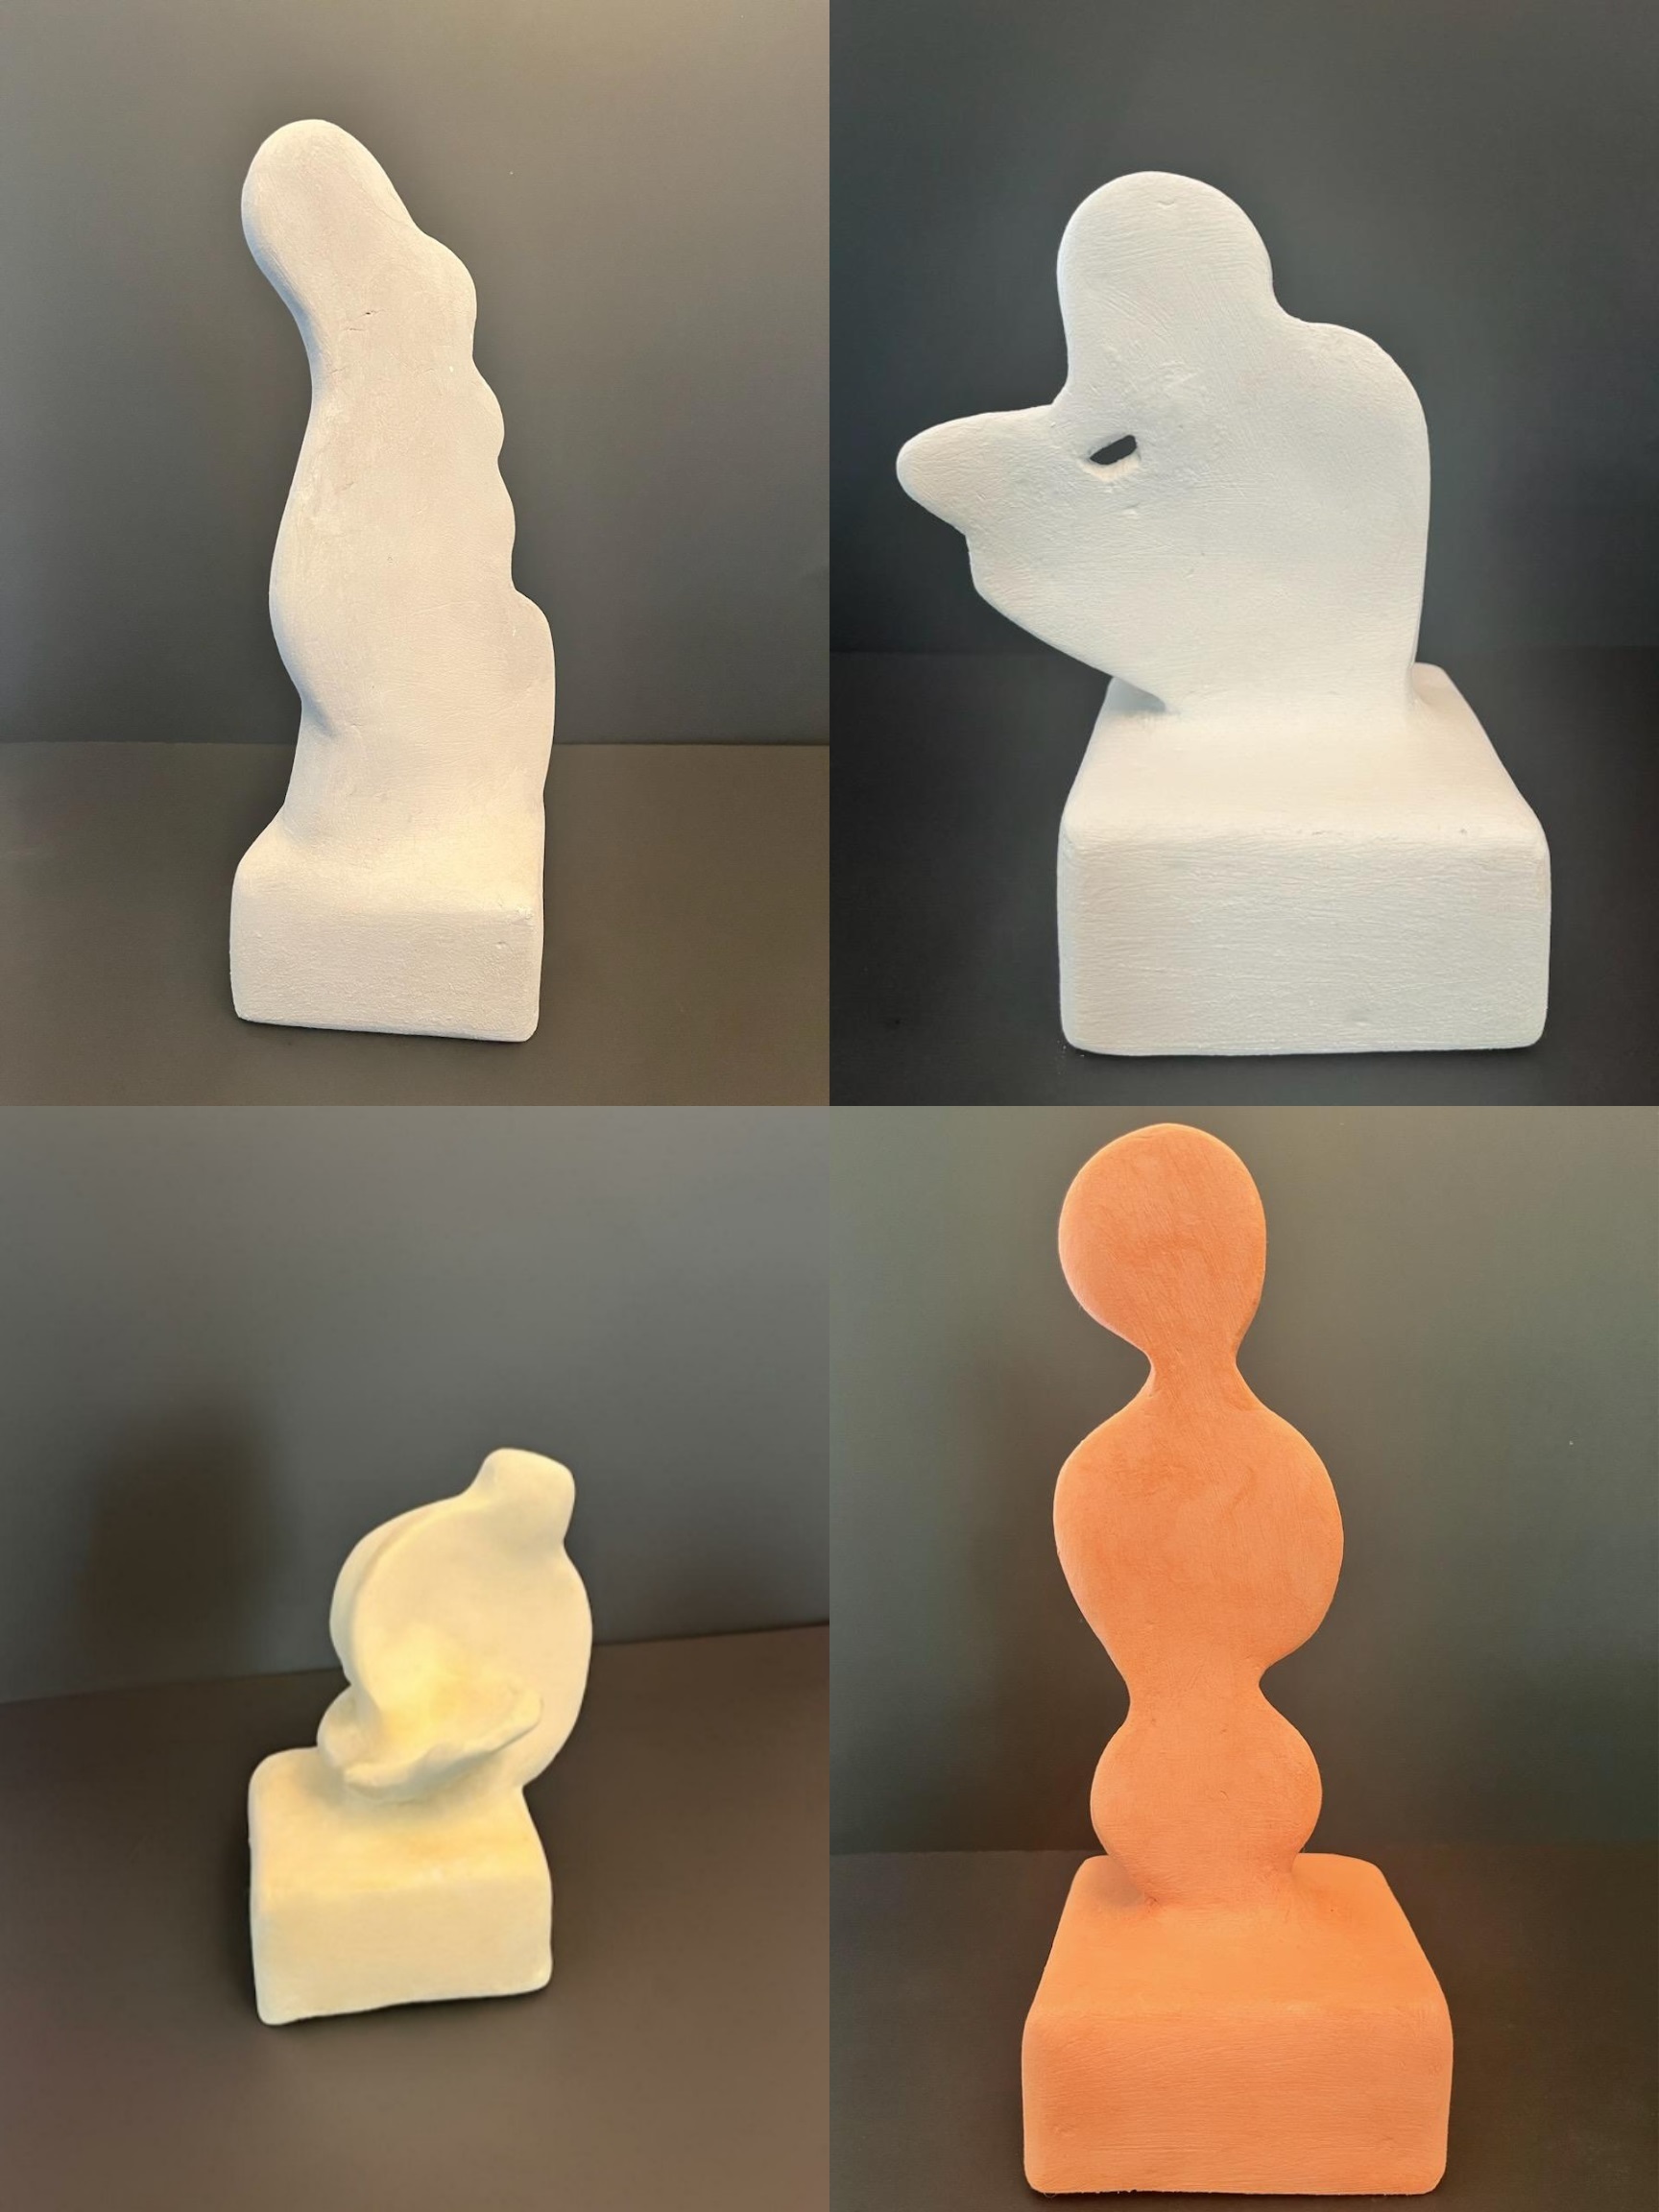 Abstract Student / Identity Sculptures: "Abstract Mother", "Abstract Teacher Sitting", "Abstract Artist", and "Abstract Student", 2023
Air dry modeling clay
4 in x 4 in x 8 in - 4 in x 4 in x 12 in